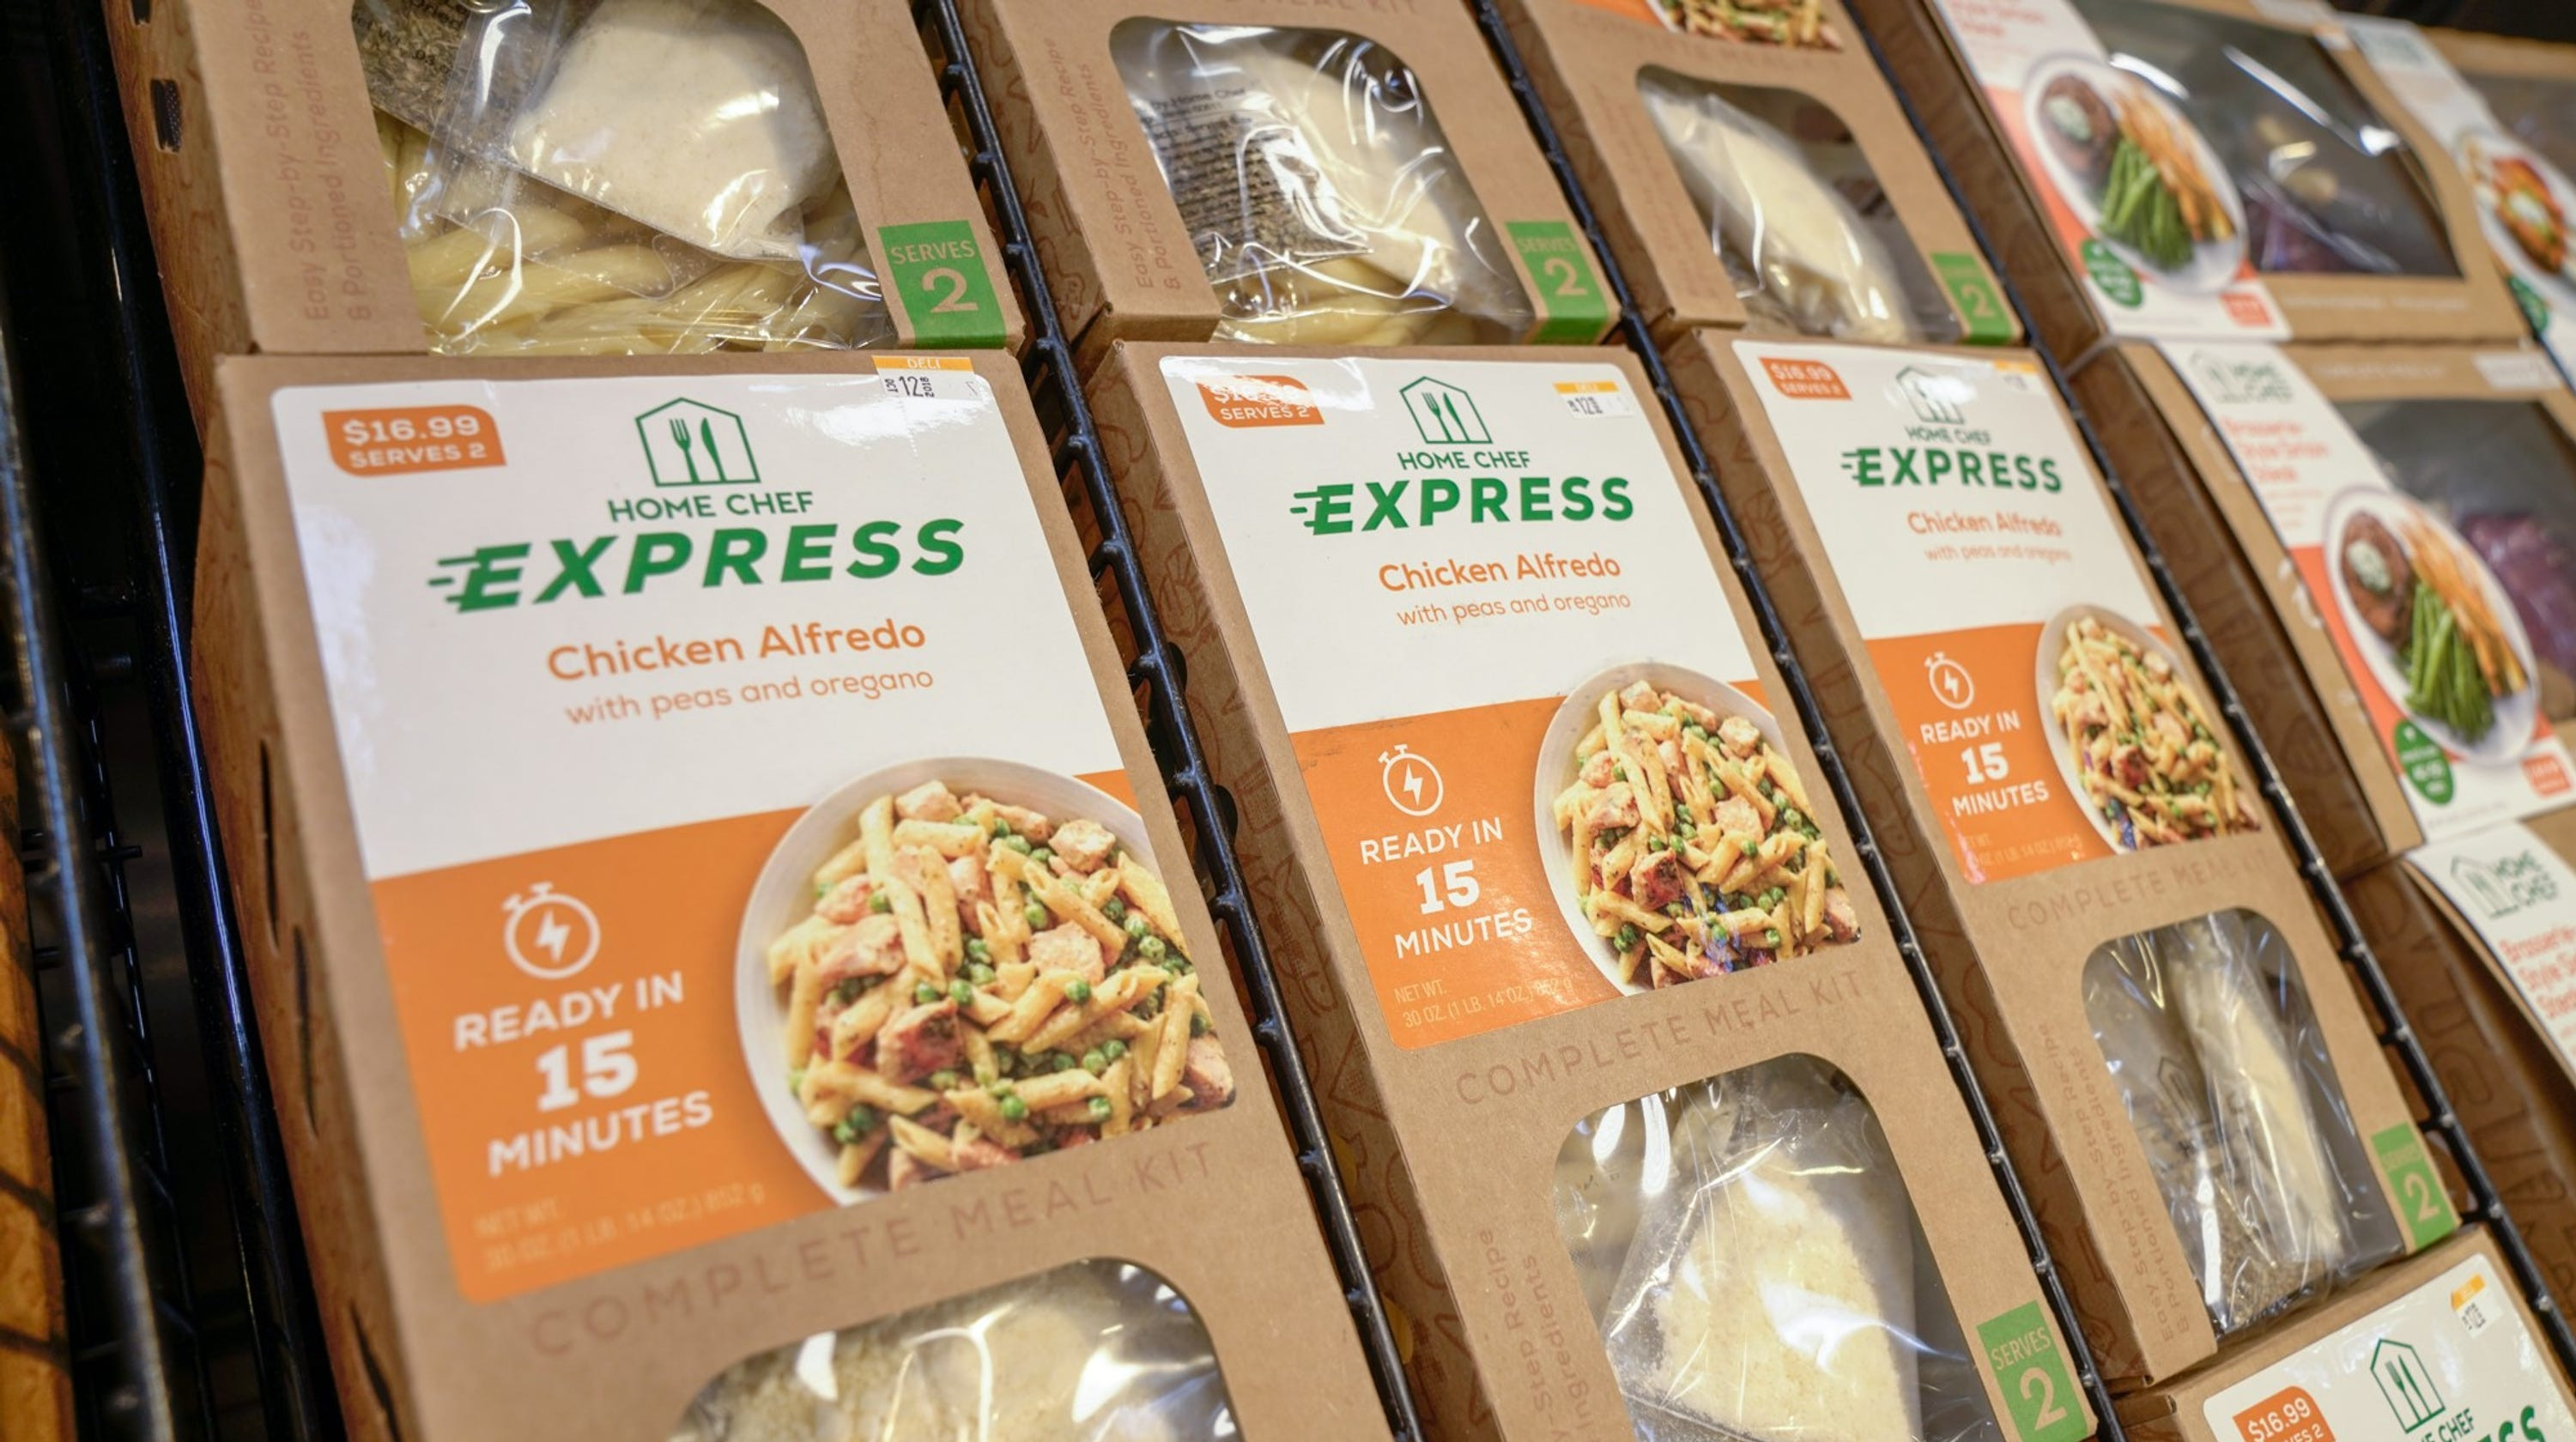 Kroger Thanksgiving Dinner 2019
 Kroger Home Chef will bring meal kits into supermarkets